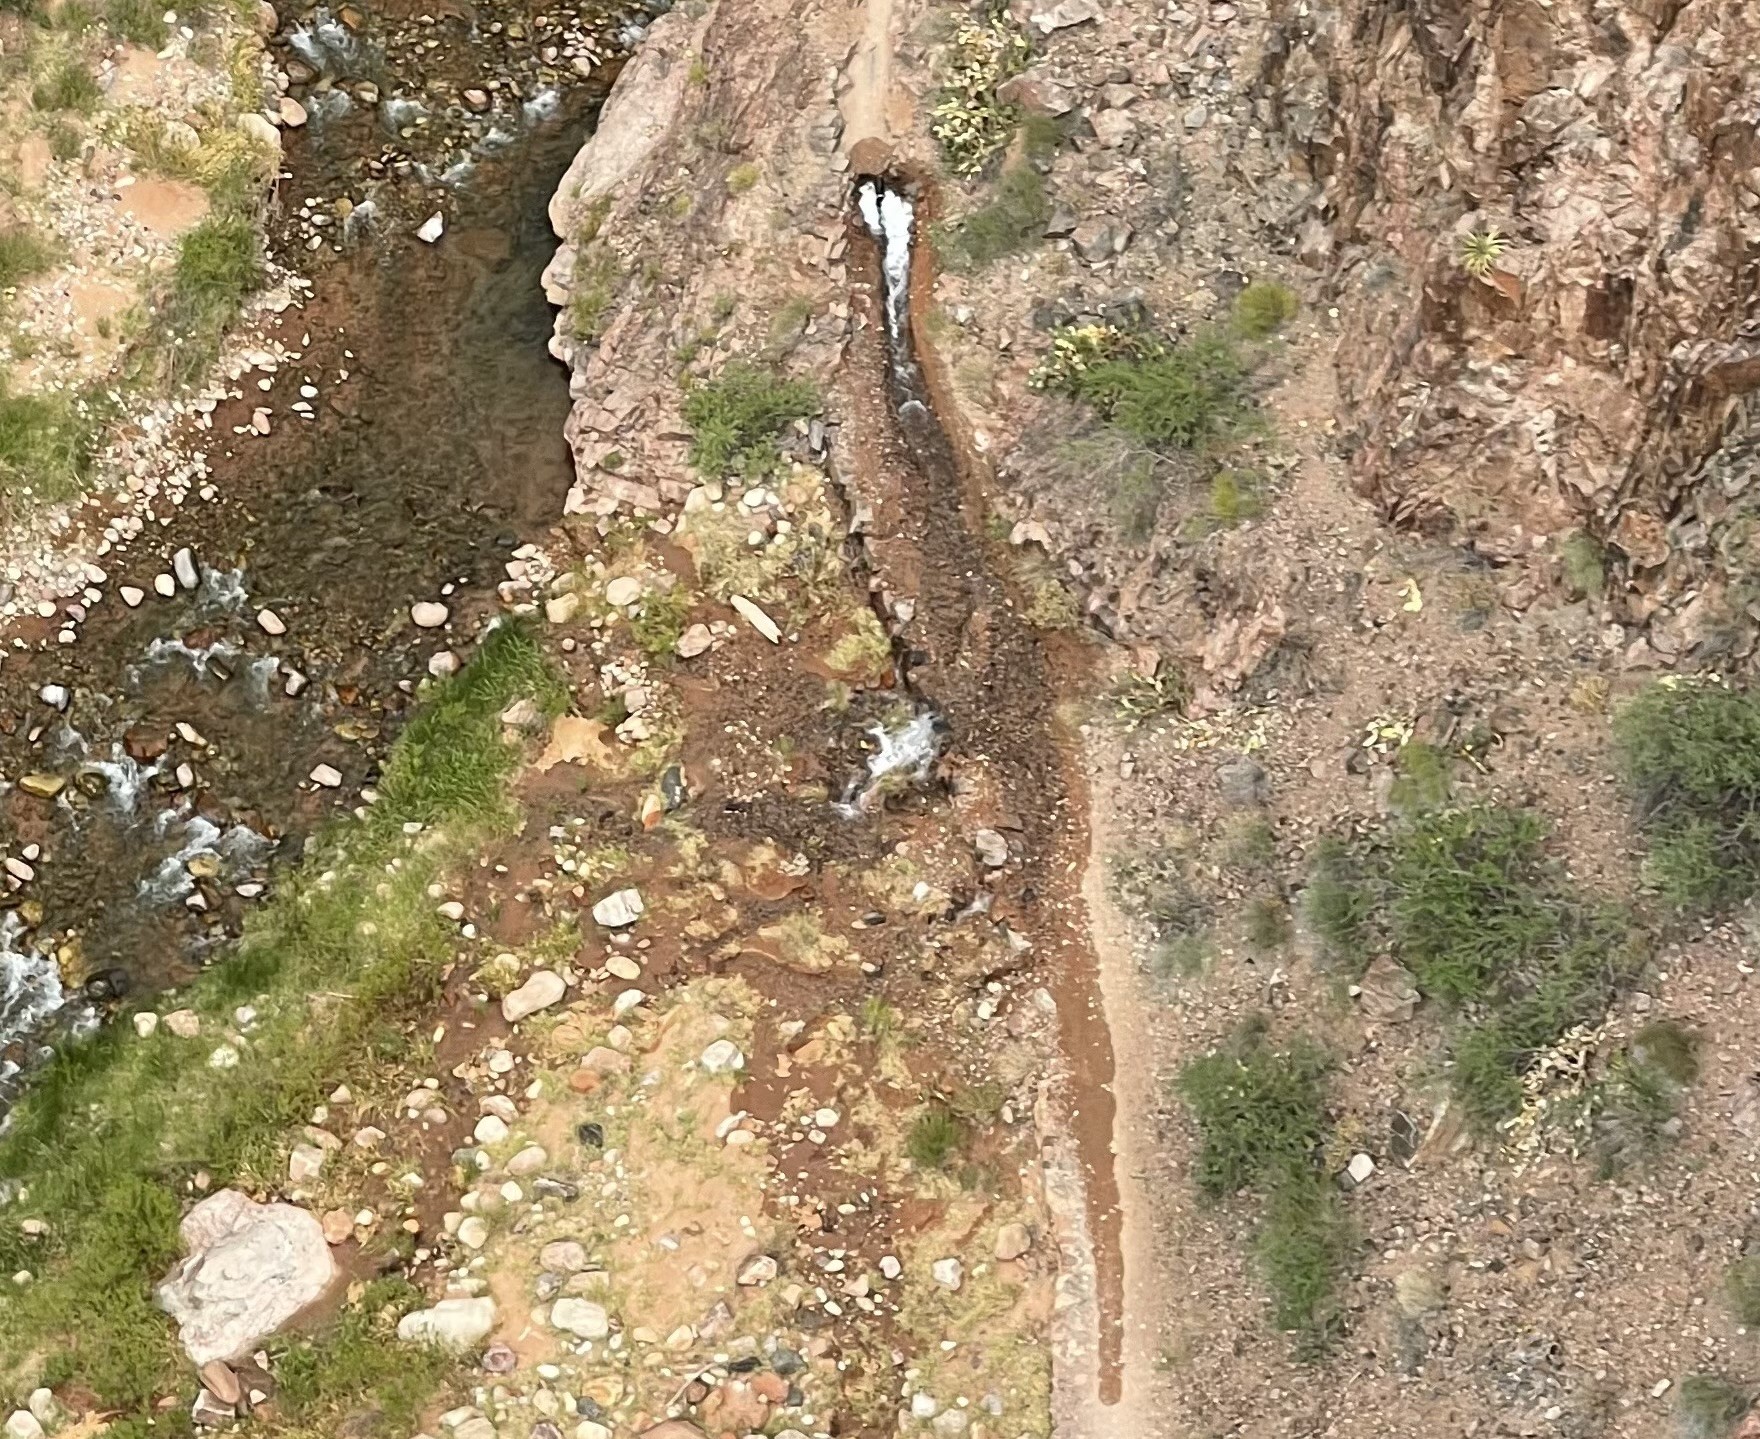 A photo showing a portion of the North Kaibab Trail with obvious water breaks